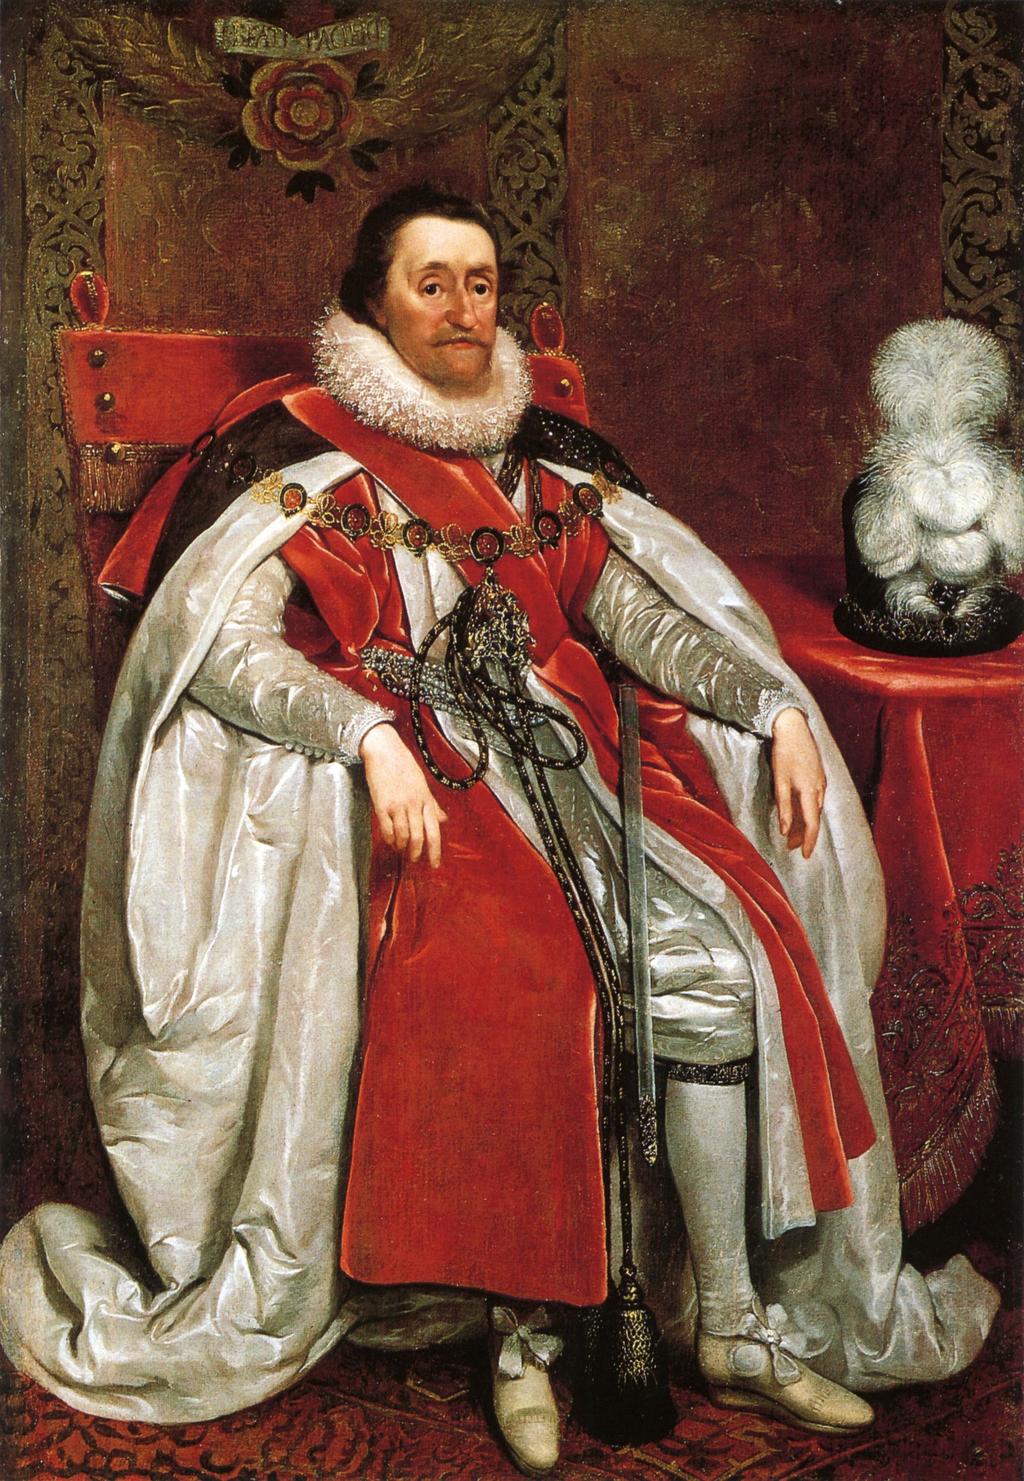 James I of England James I s refusal to reform the Church of England prompted many Puritans to leave England to establish the kind of church they wanted in the New World.